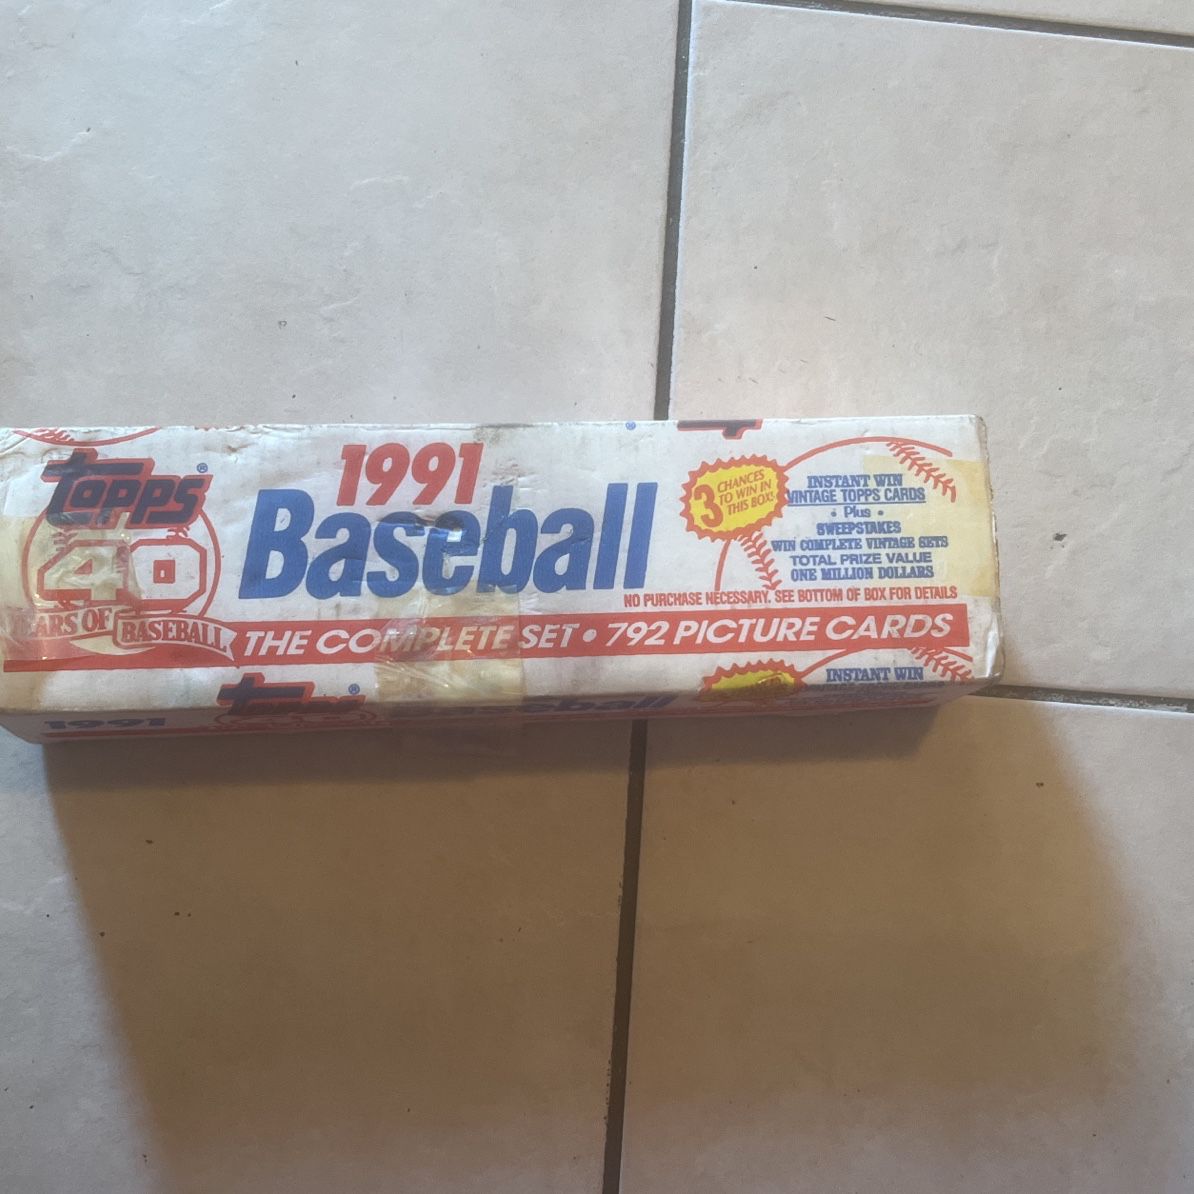 Topped 1991 Baseball - The Complete Set 